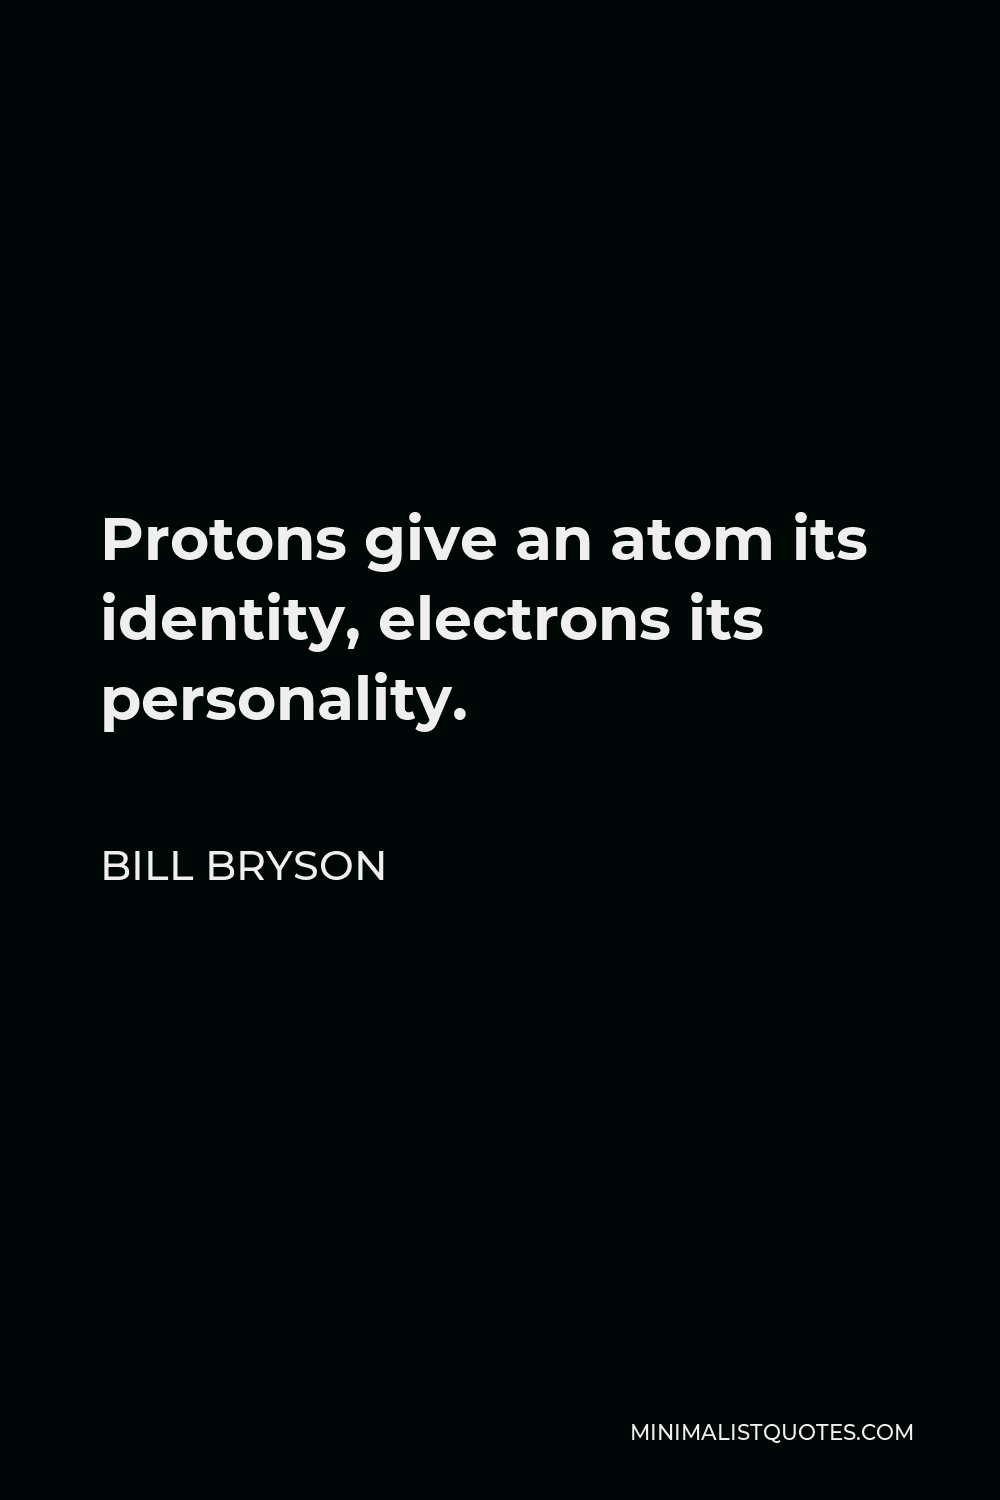 Bill Bryson Quote - Protons give an atom its identity, electrons its personality.